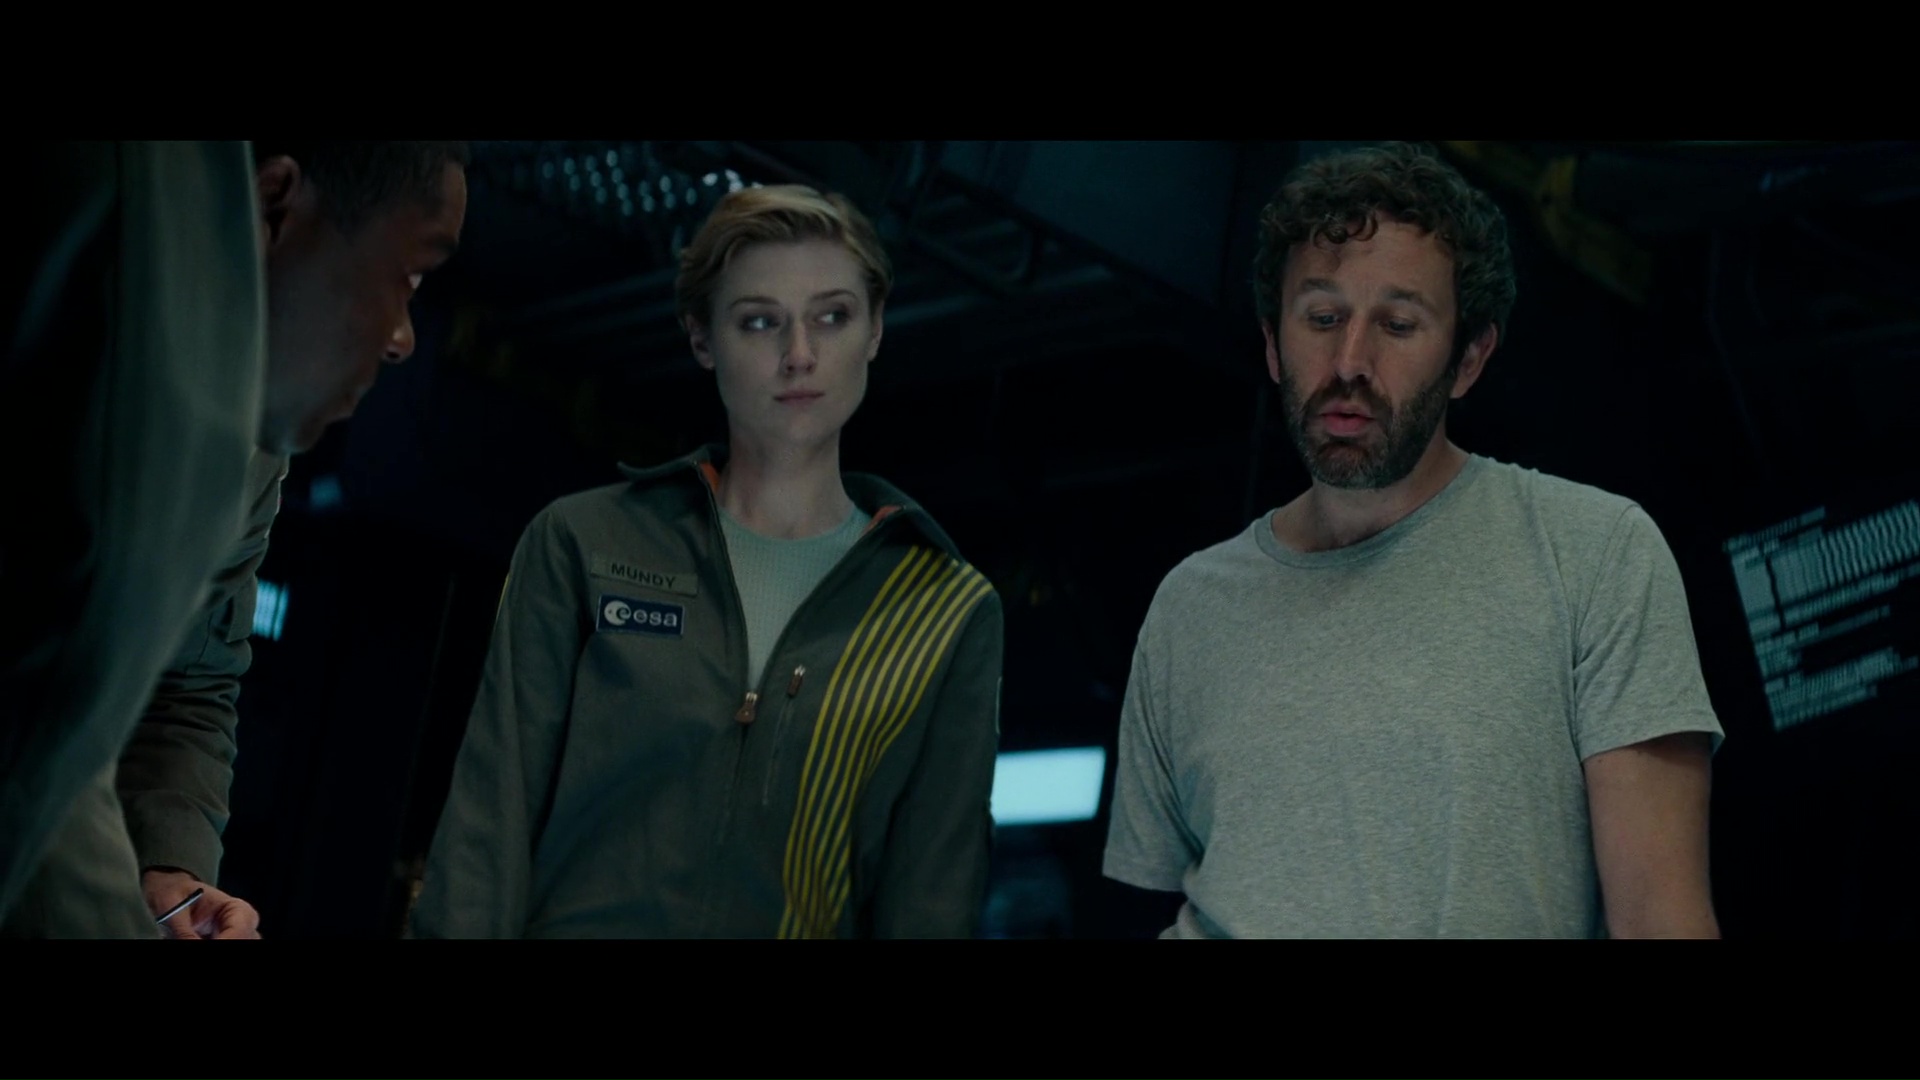 2018 - The Cloverfield Paradox 1080p Lat-Cast-Ing 5.1 (2018) RqKw3hSL_o